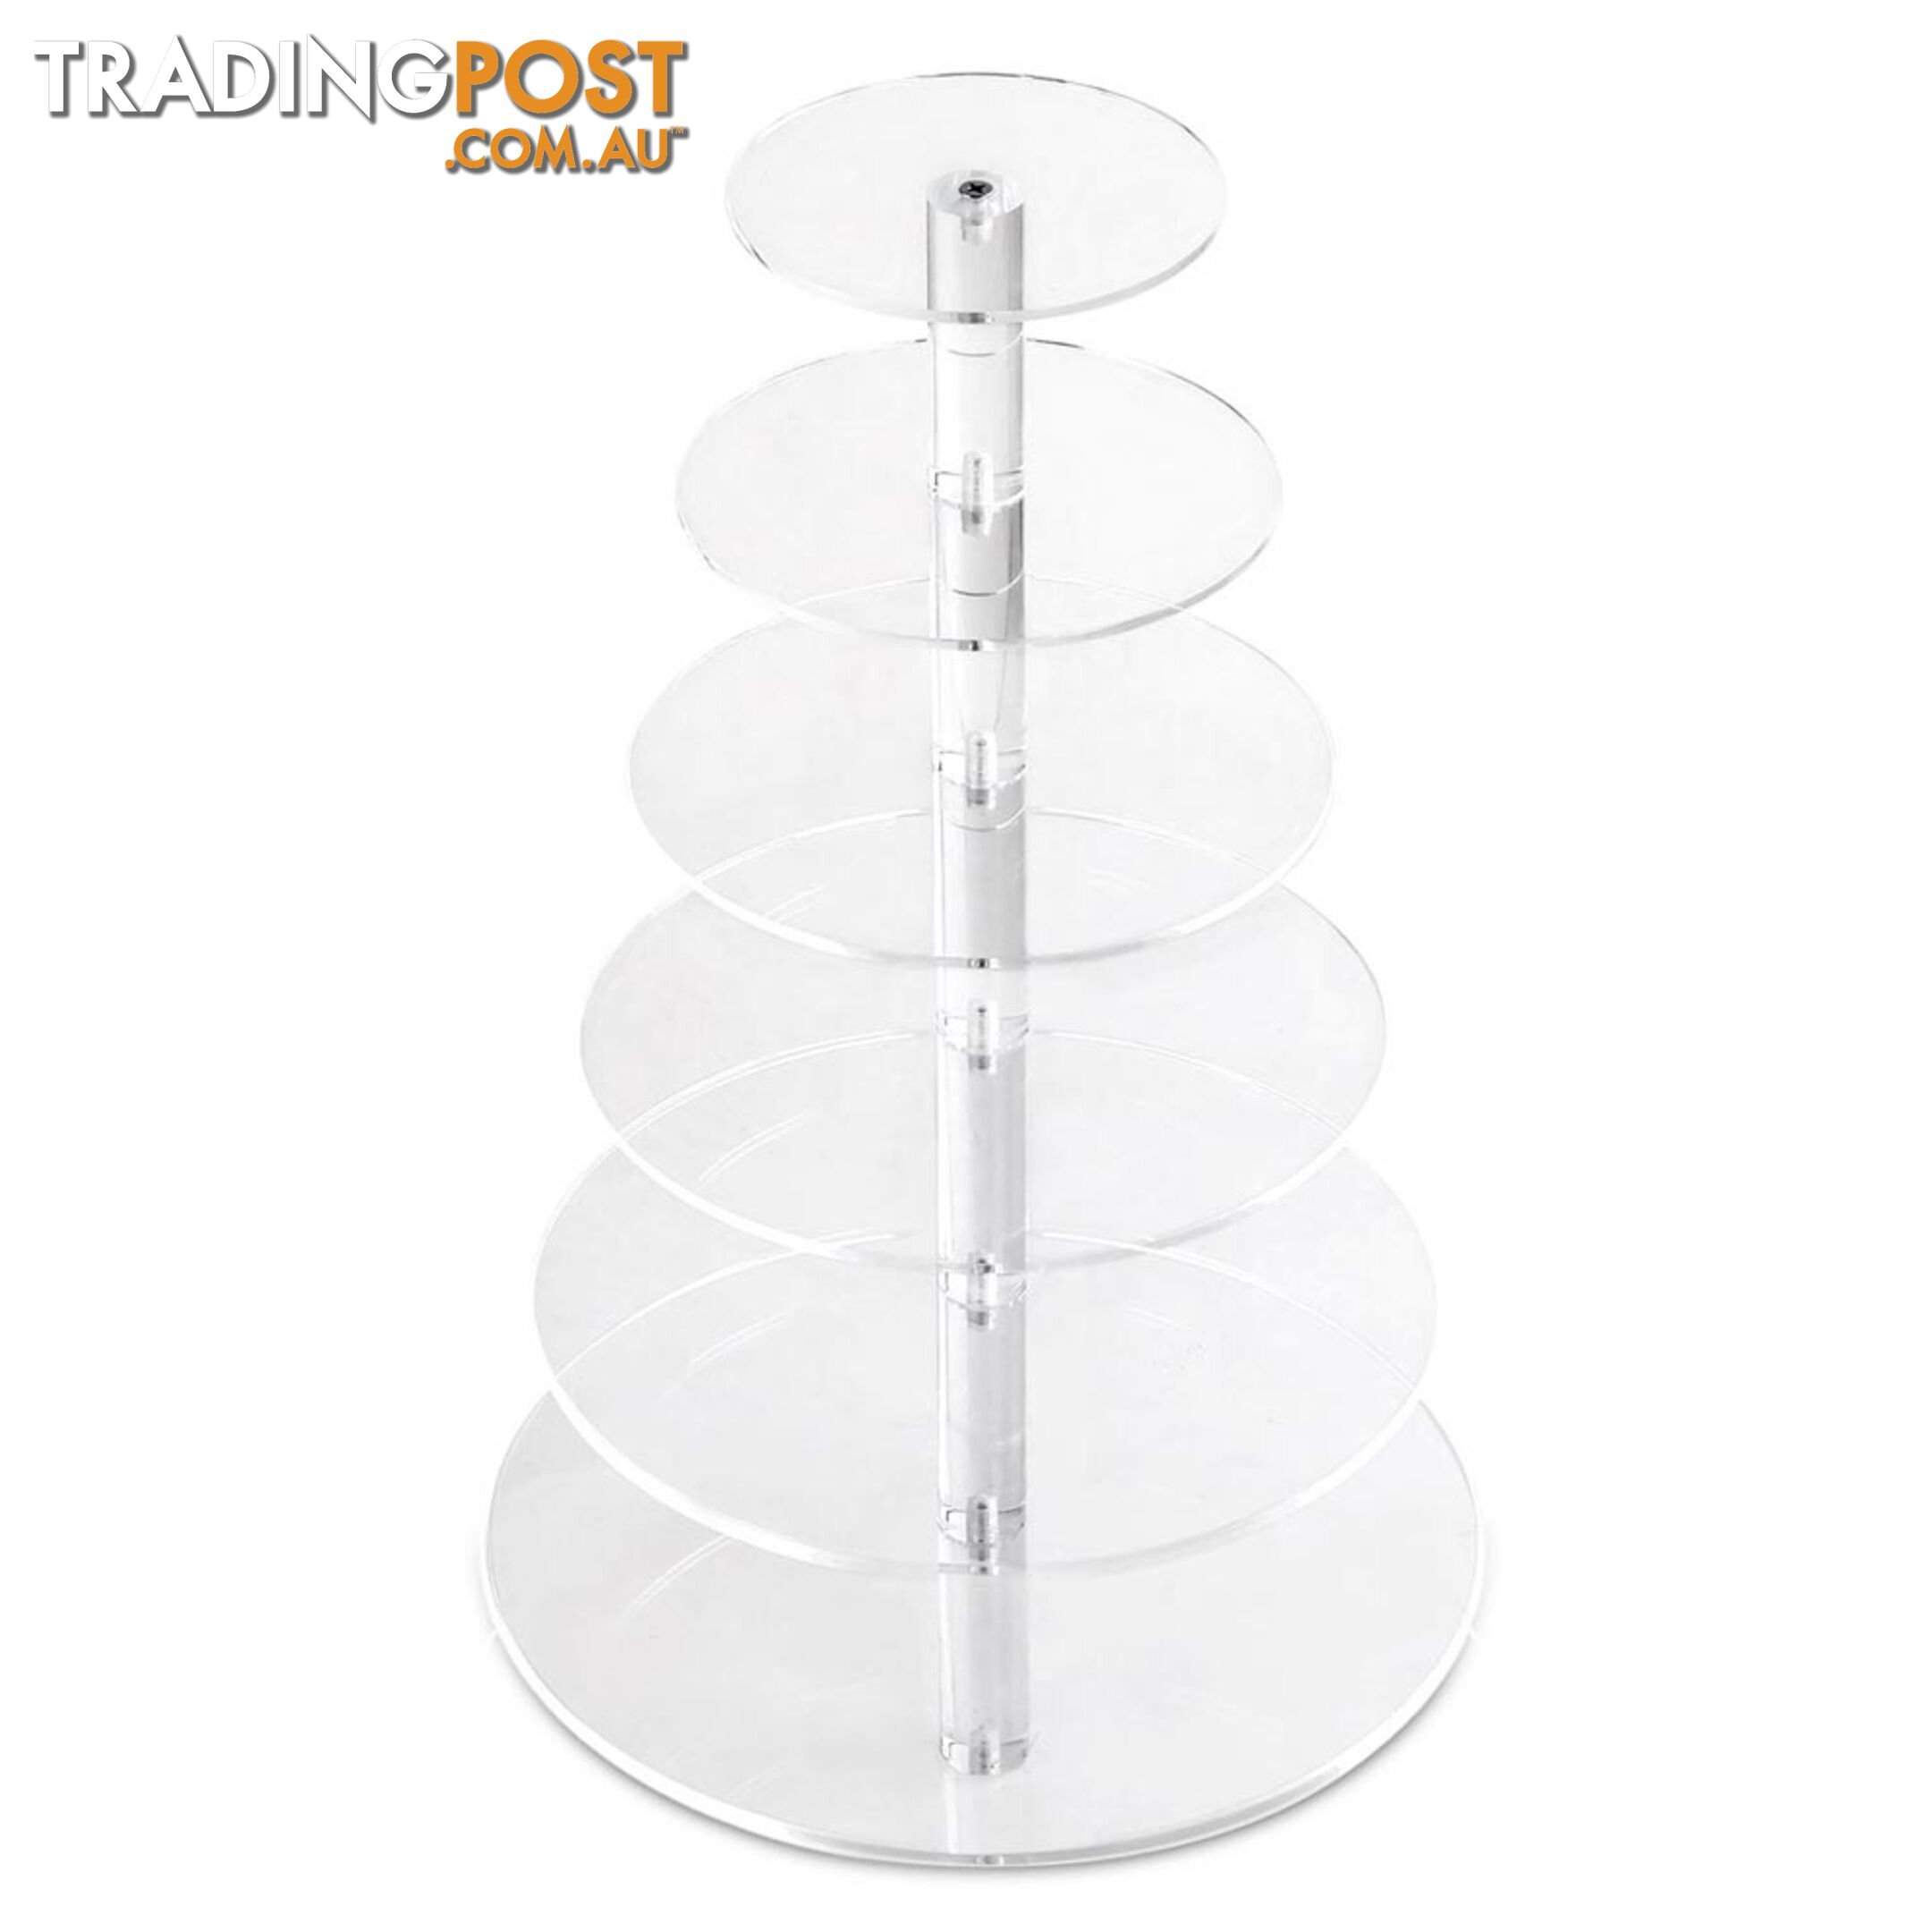 6 Tier Cake Stand Clear Acrylic Display Plate High Tea Wedding Birthday Party